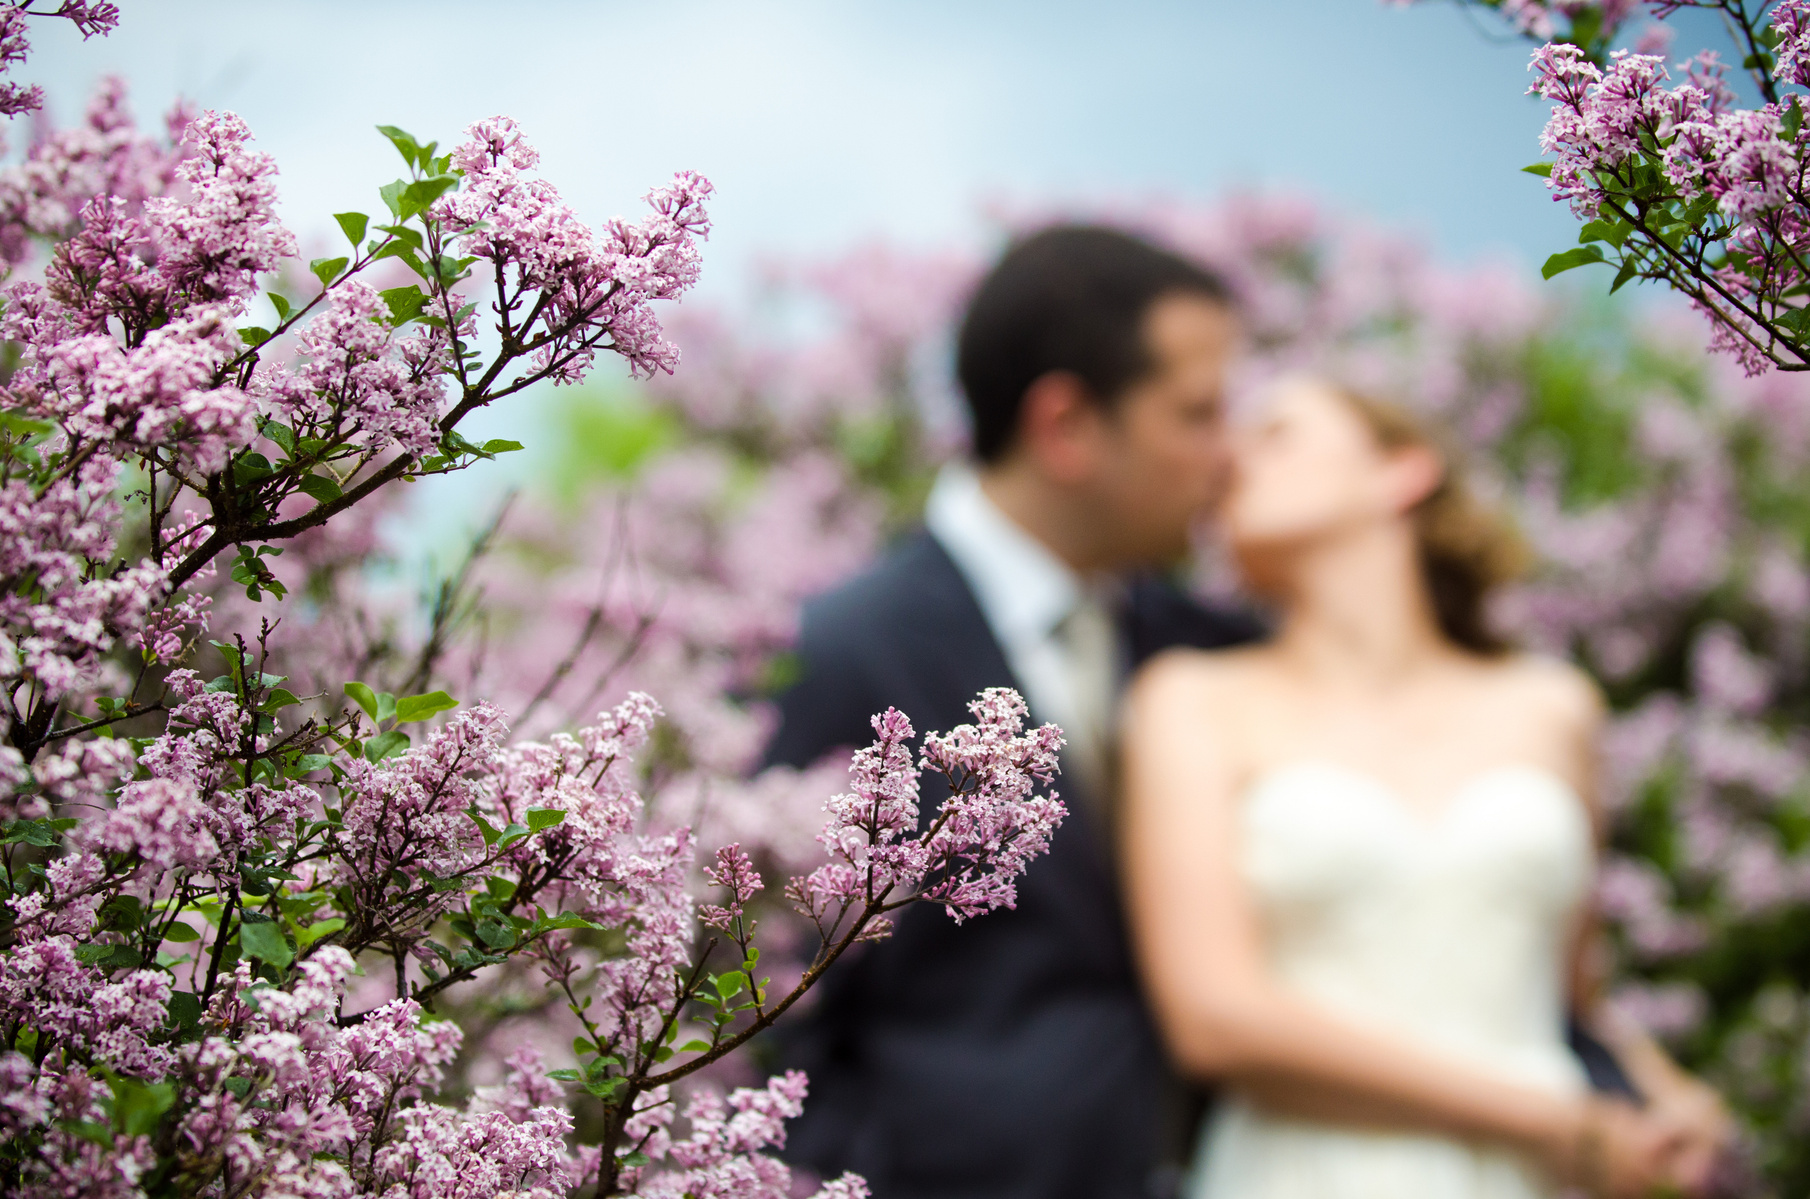 Bride and Groom in Lilacs, Highland Park Rochester NY